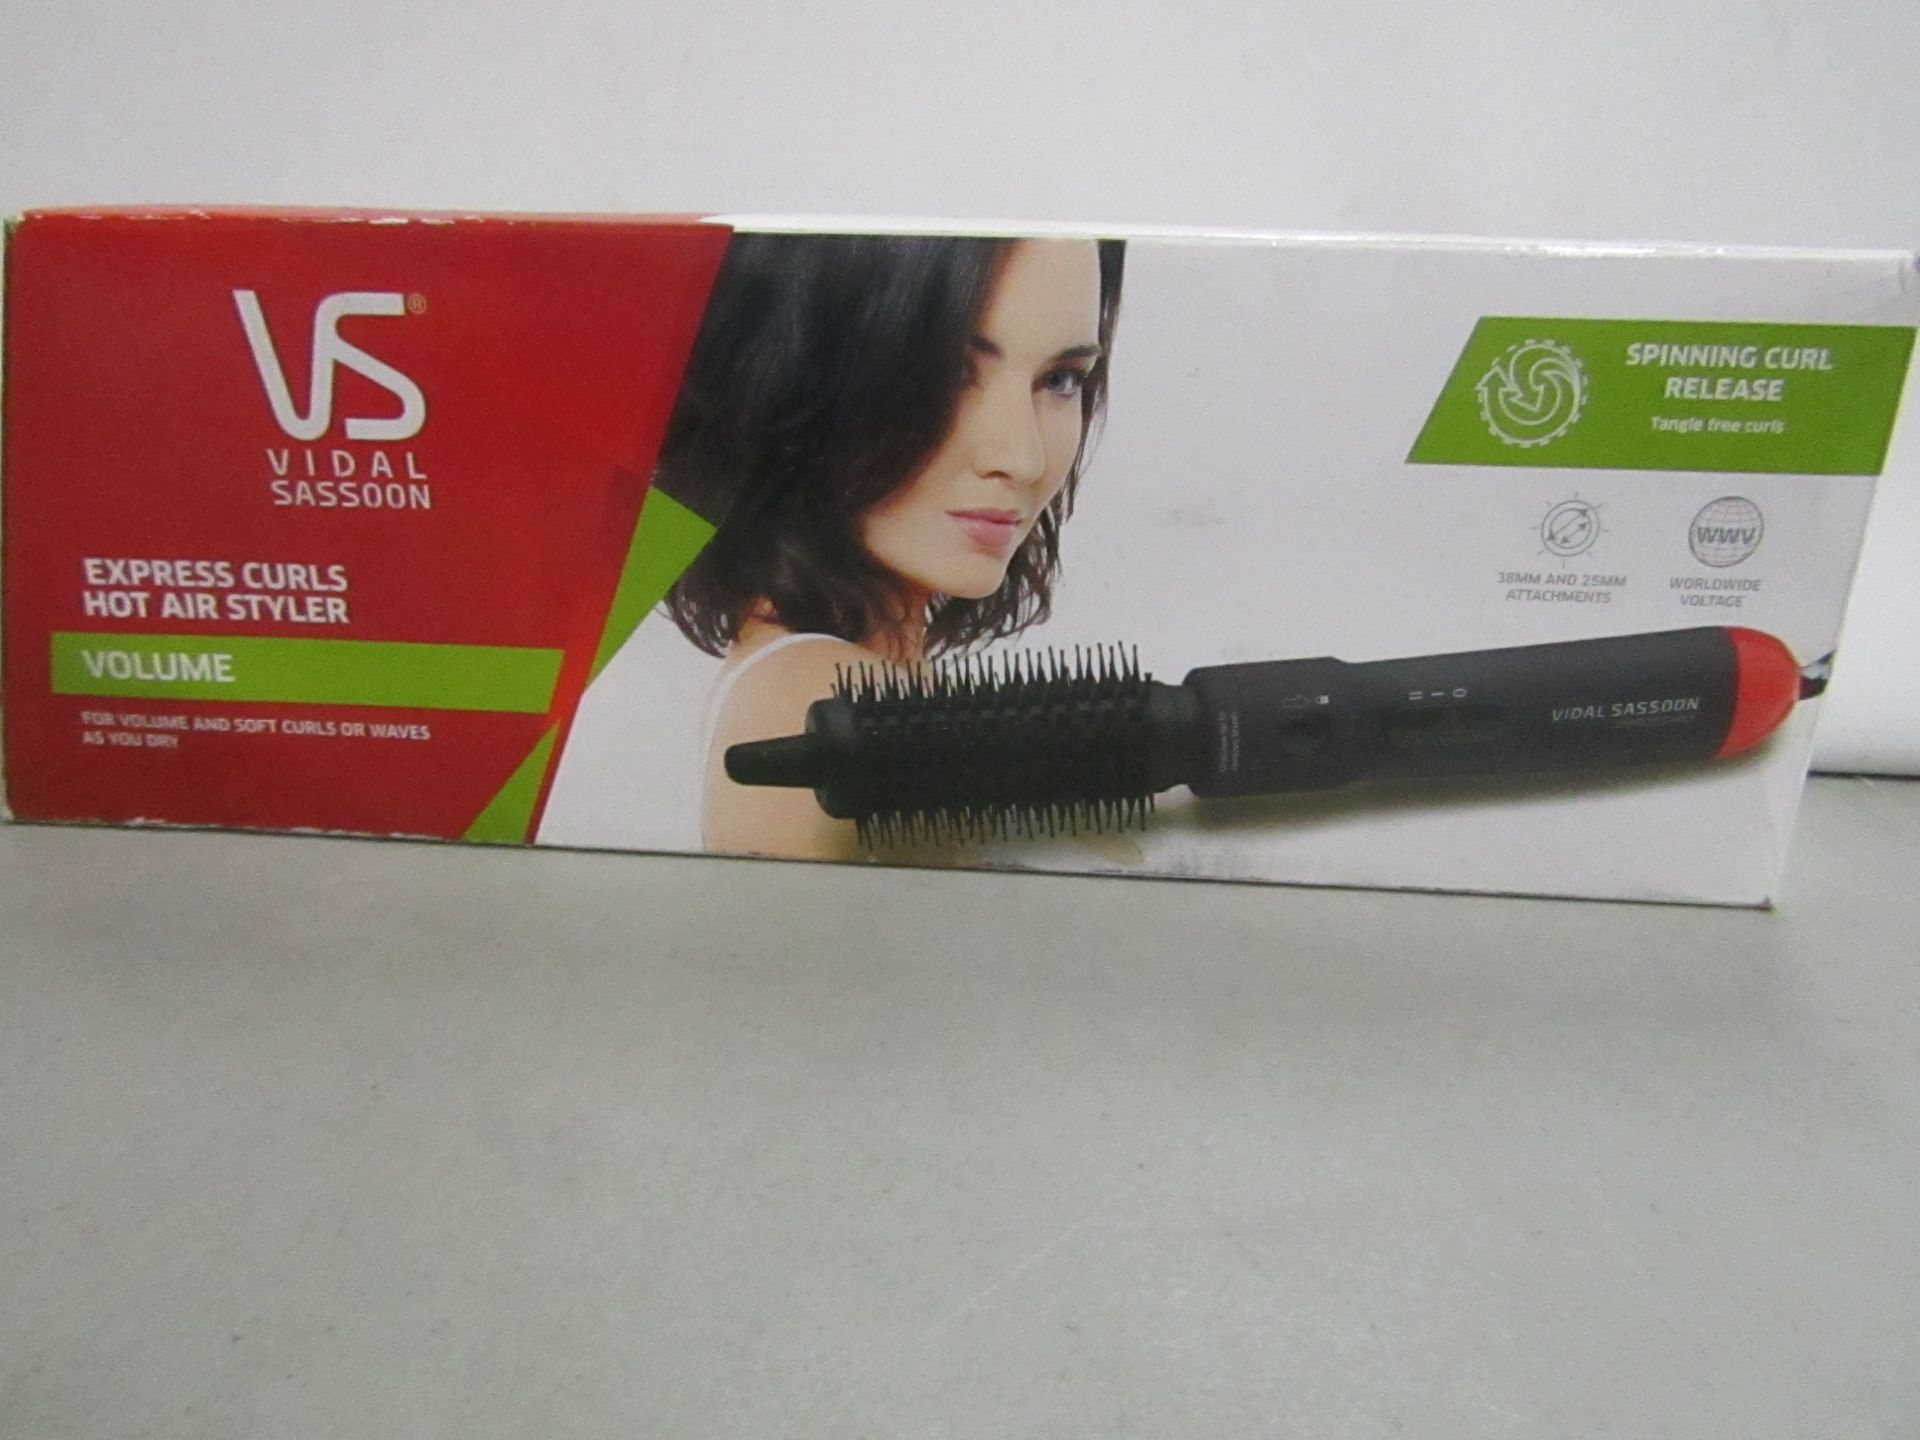 Vidal Sassoon hot air styler, tested working and boxed.